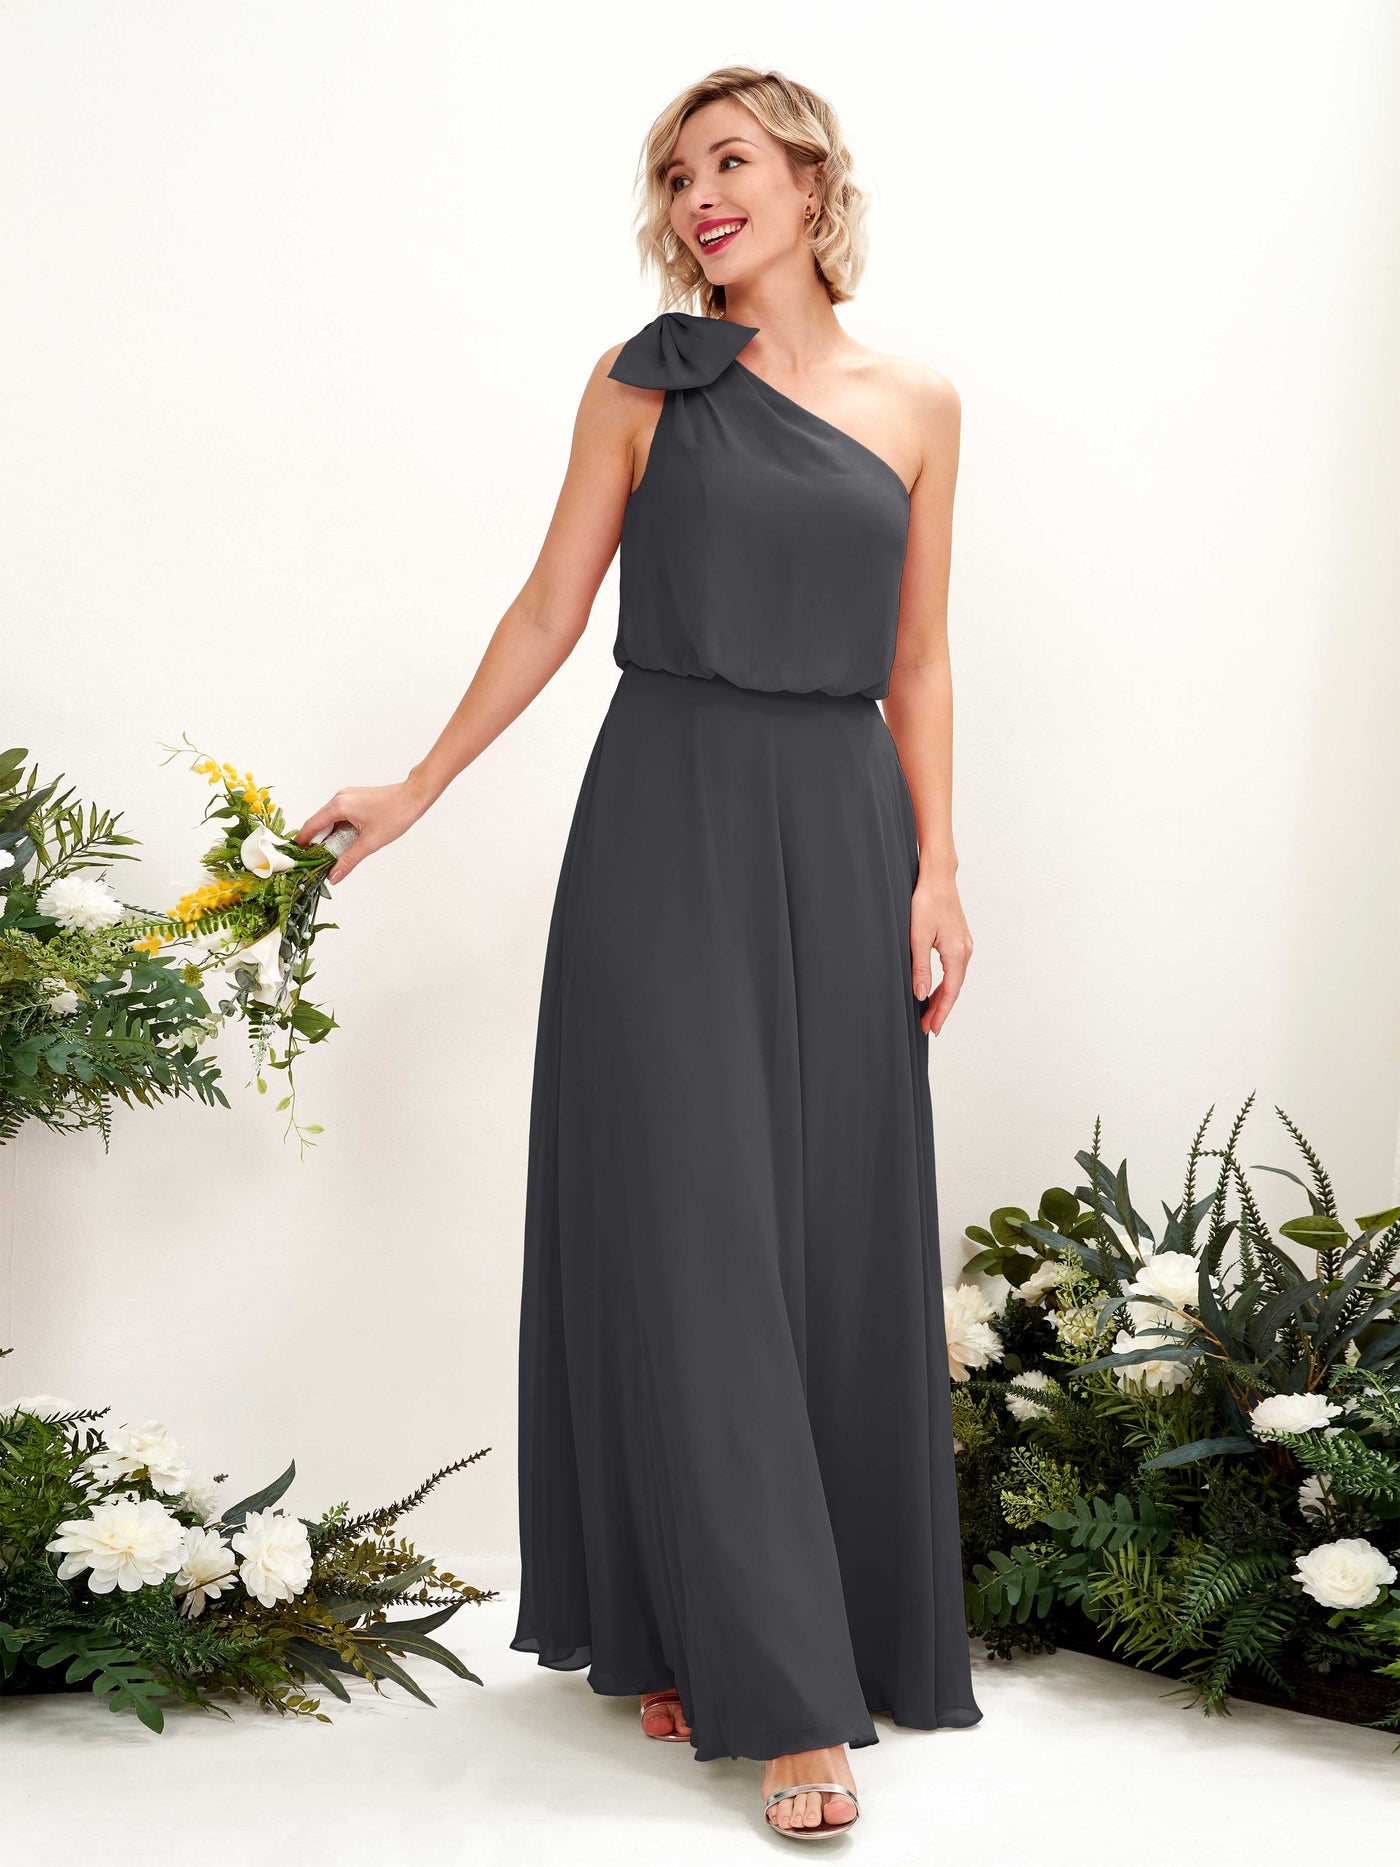 Pewter Bridesmaid Dresses Bridesmaid Dress A-line Chiffon One Shoulder Full Length Sleeveless Wedding Party Dress (81225538)#color_pewter